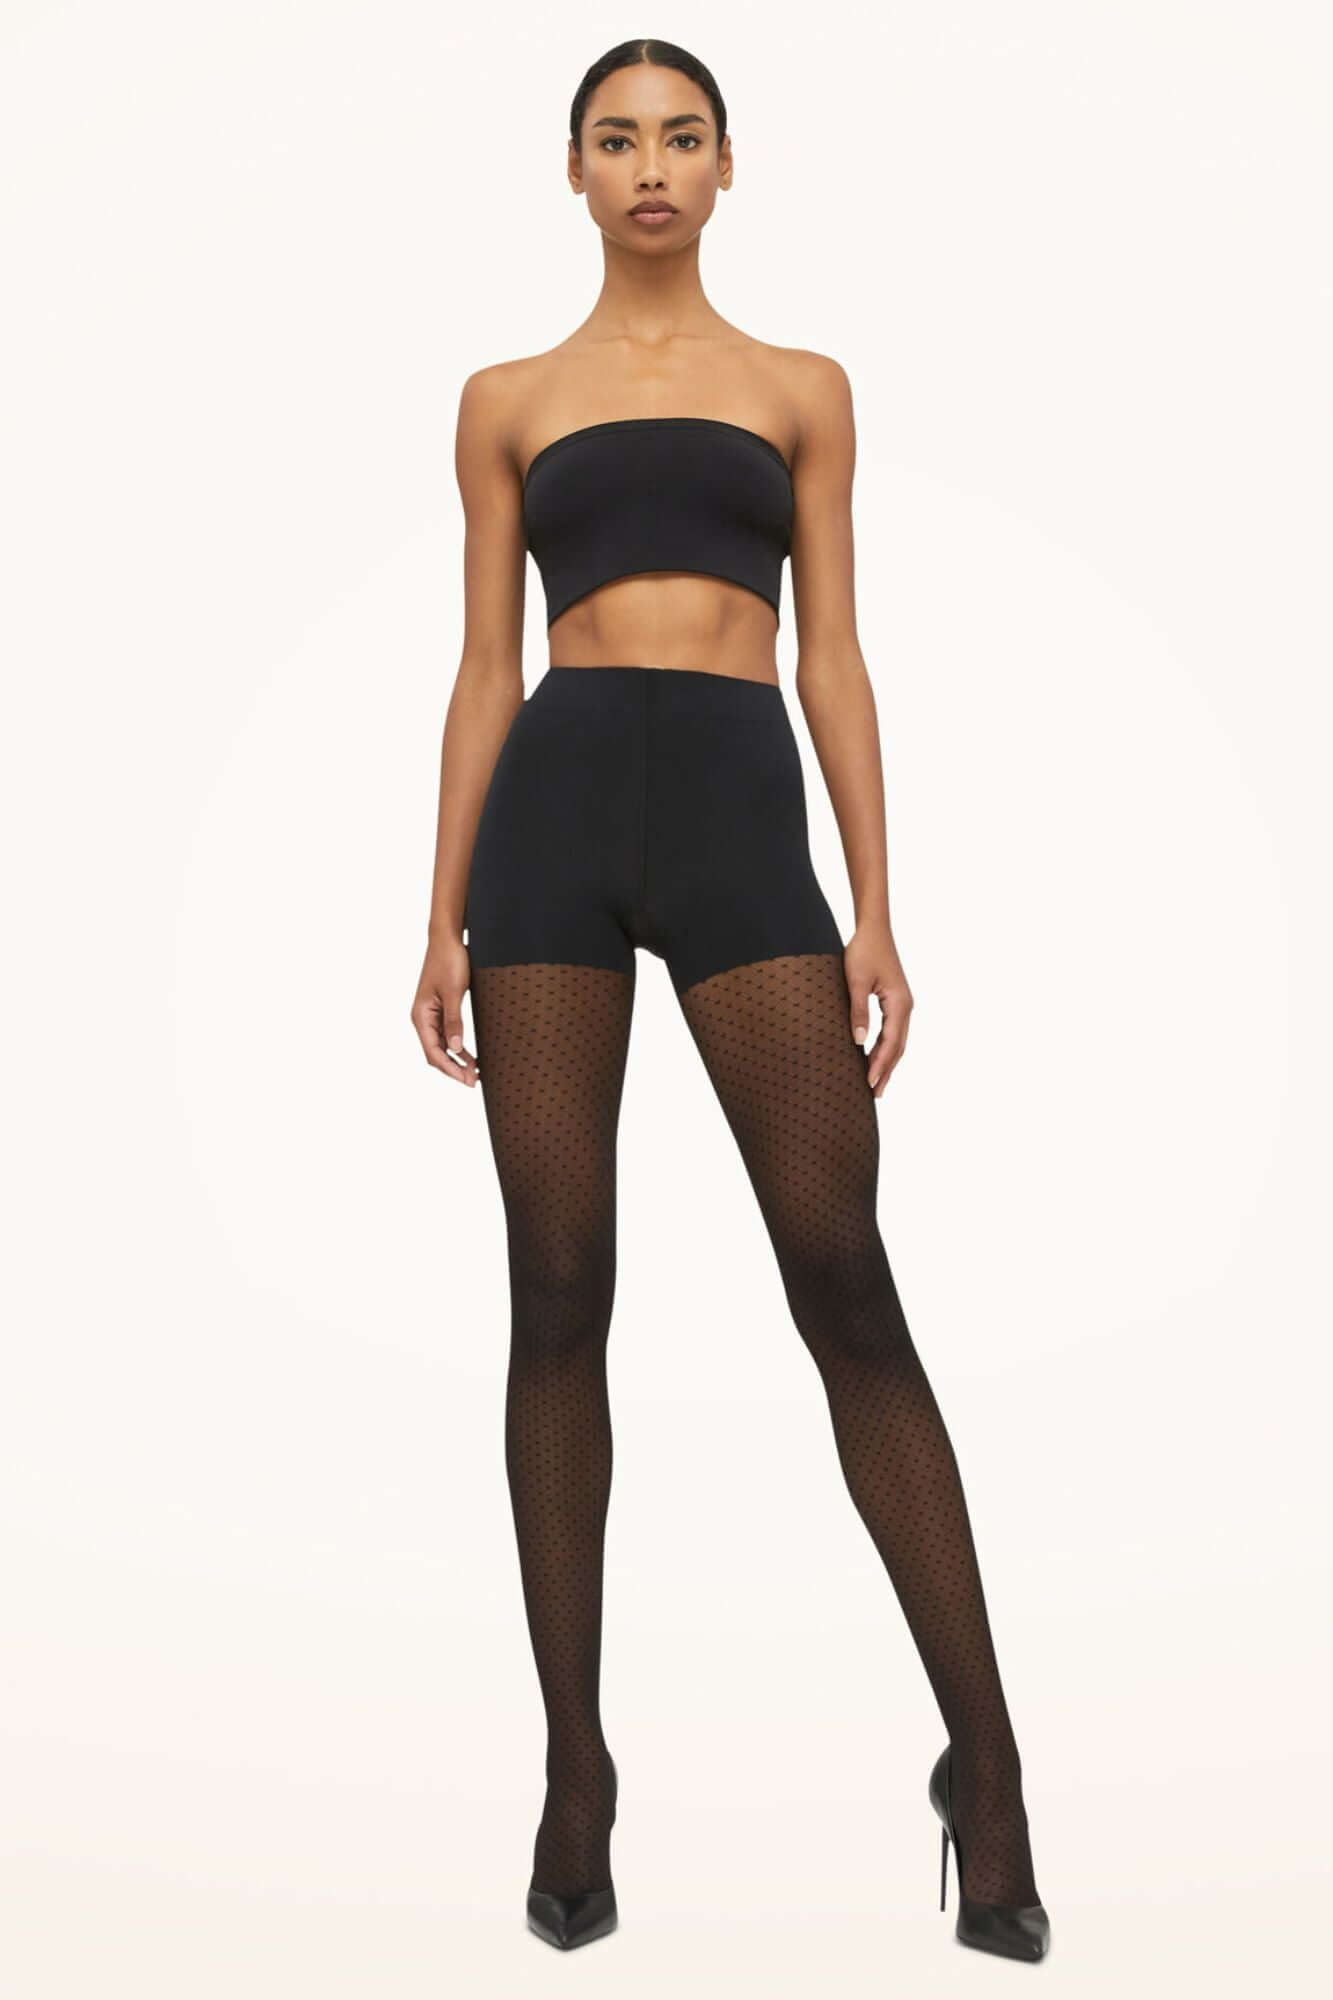 Wolford's Top Hosiery Collections